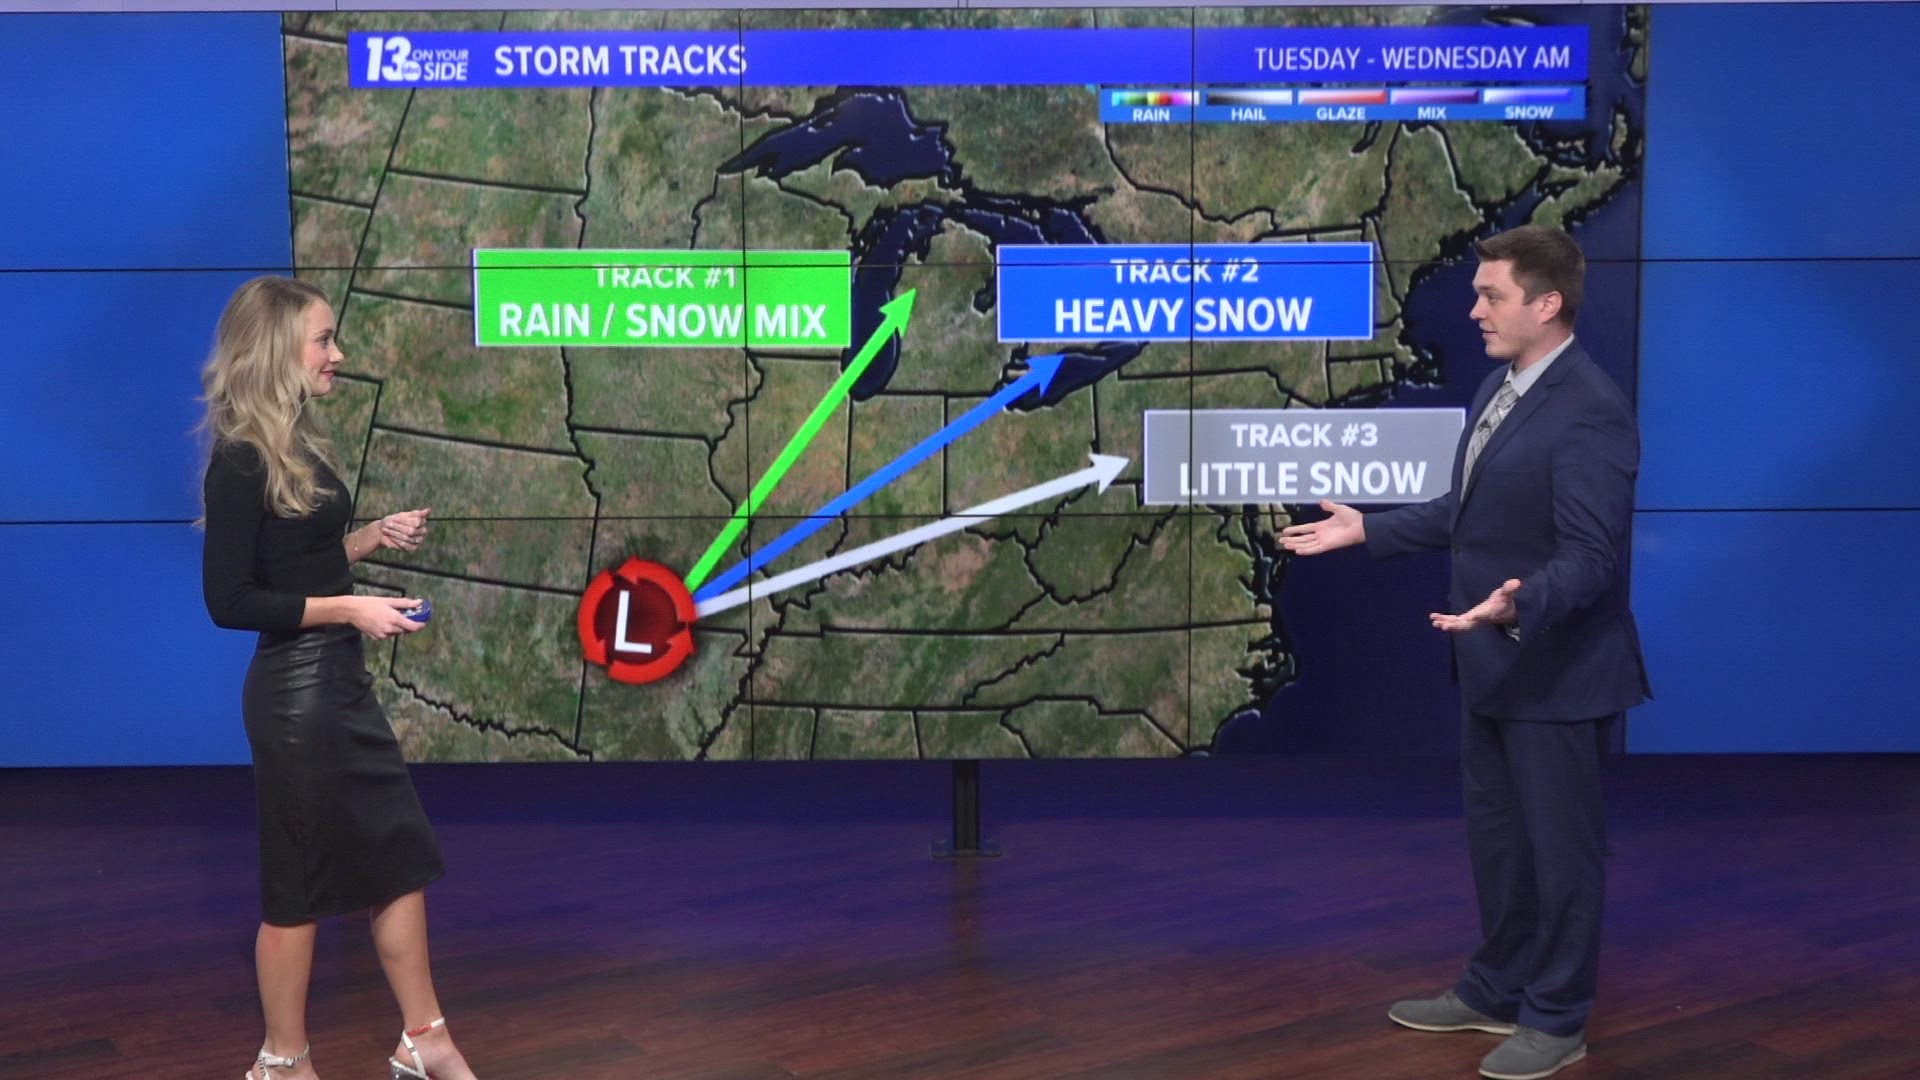 Meteorologists Samantha Jacques and Blake Hansen are taking an in-depth look at the winter storms that could come to the region next week.